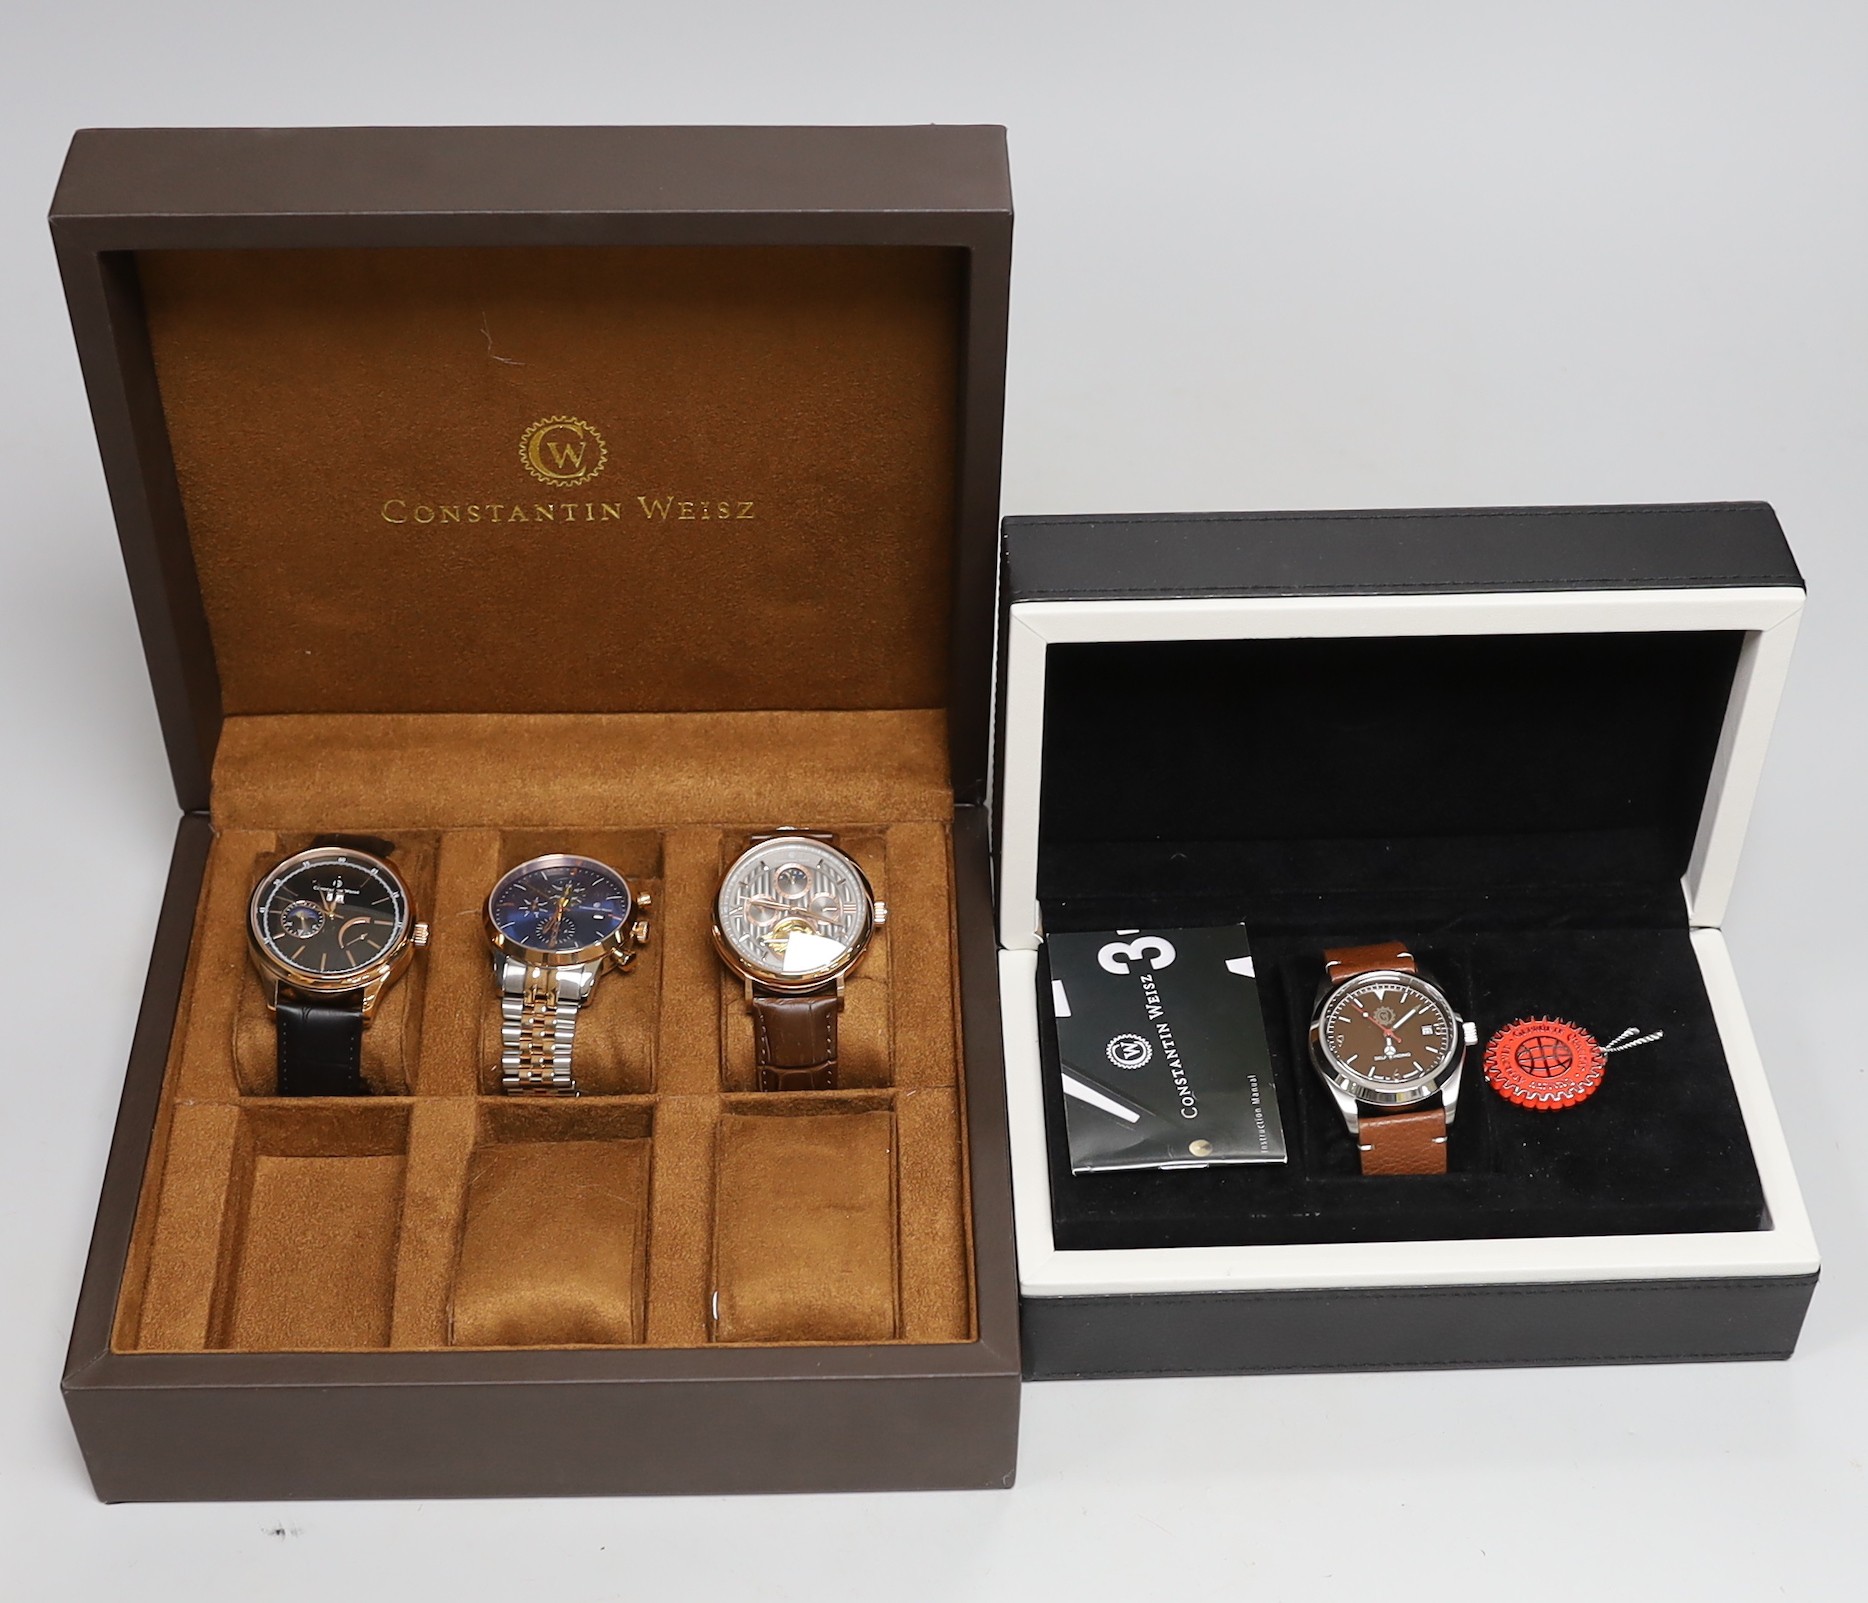 Four gentleman's assorted modern gilt metal or two tone Constantin Weisz wrist watches, including chronograph and self-winding.